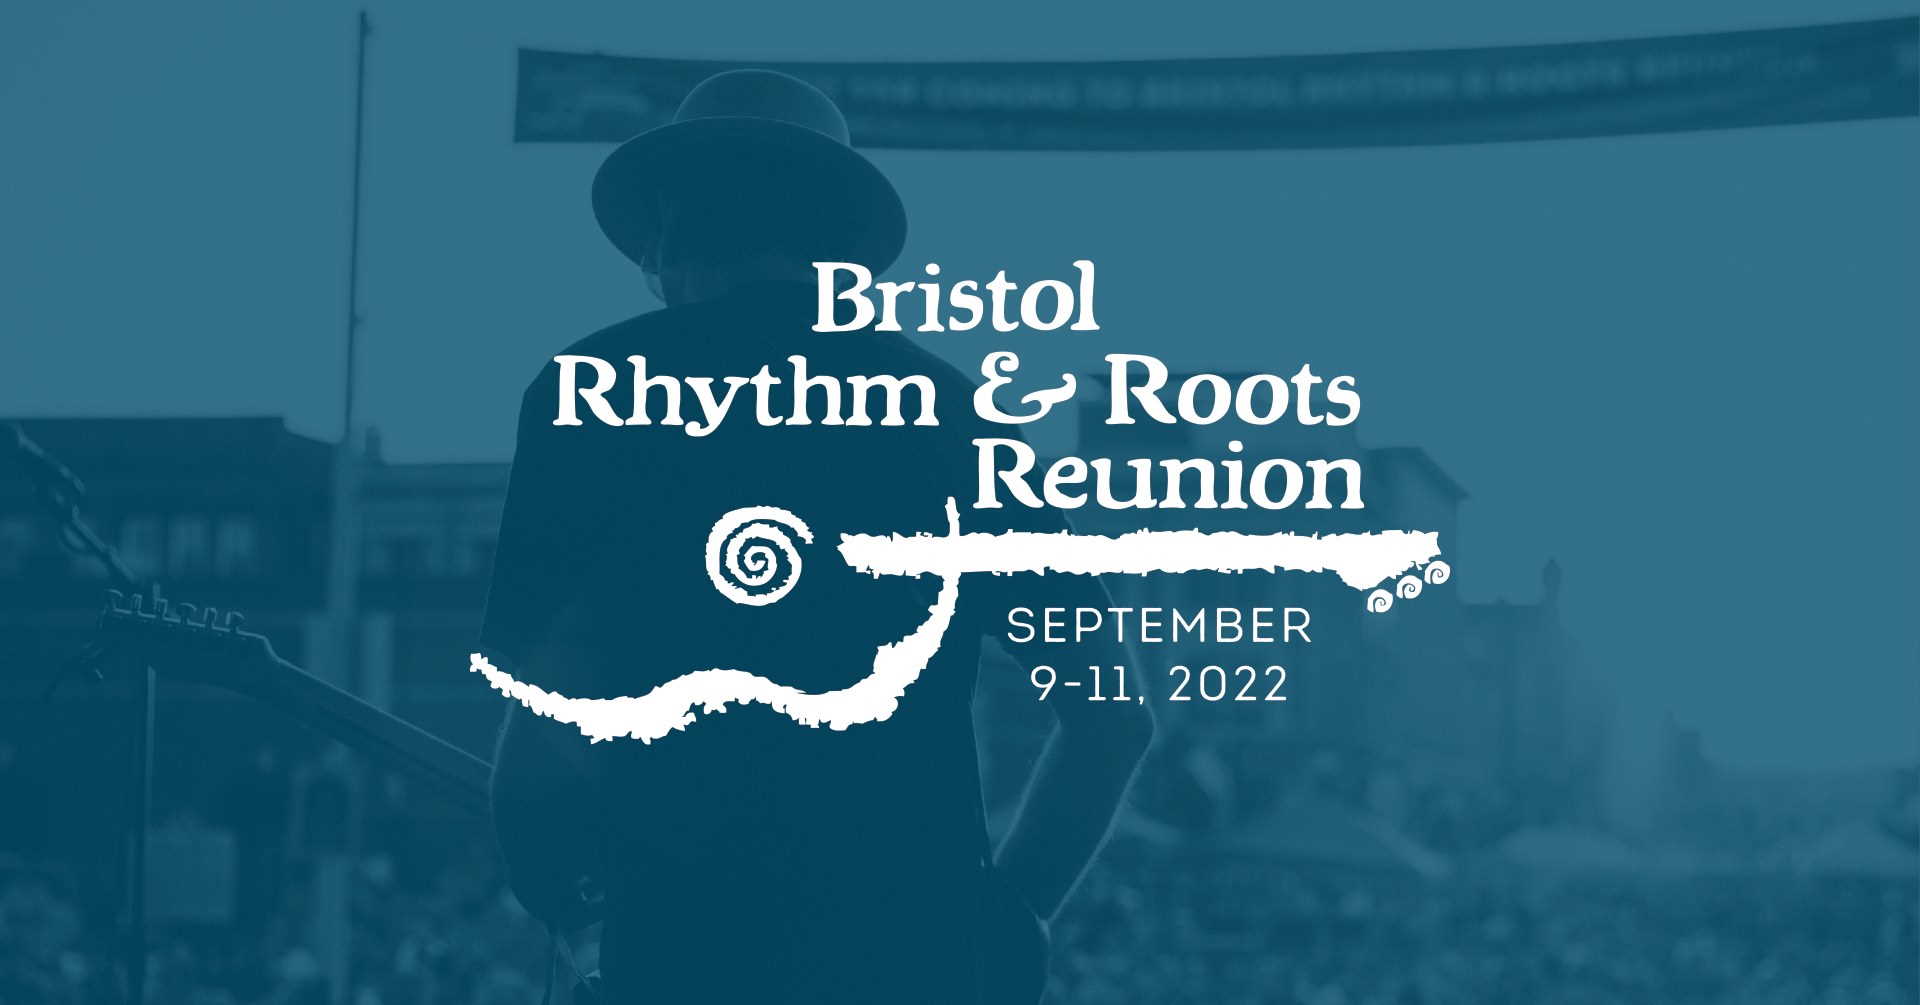 Bristol Rhythm and Roots Reunion happening this weekend - 96.9 WXBQ